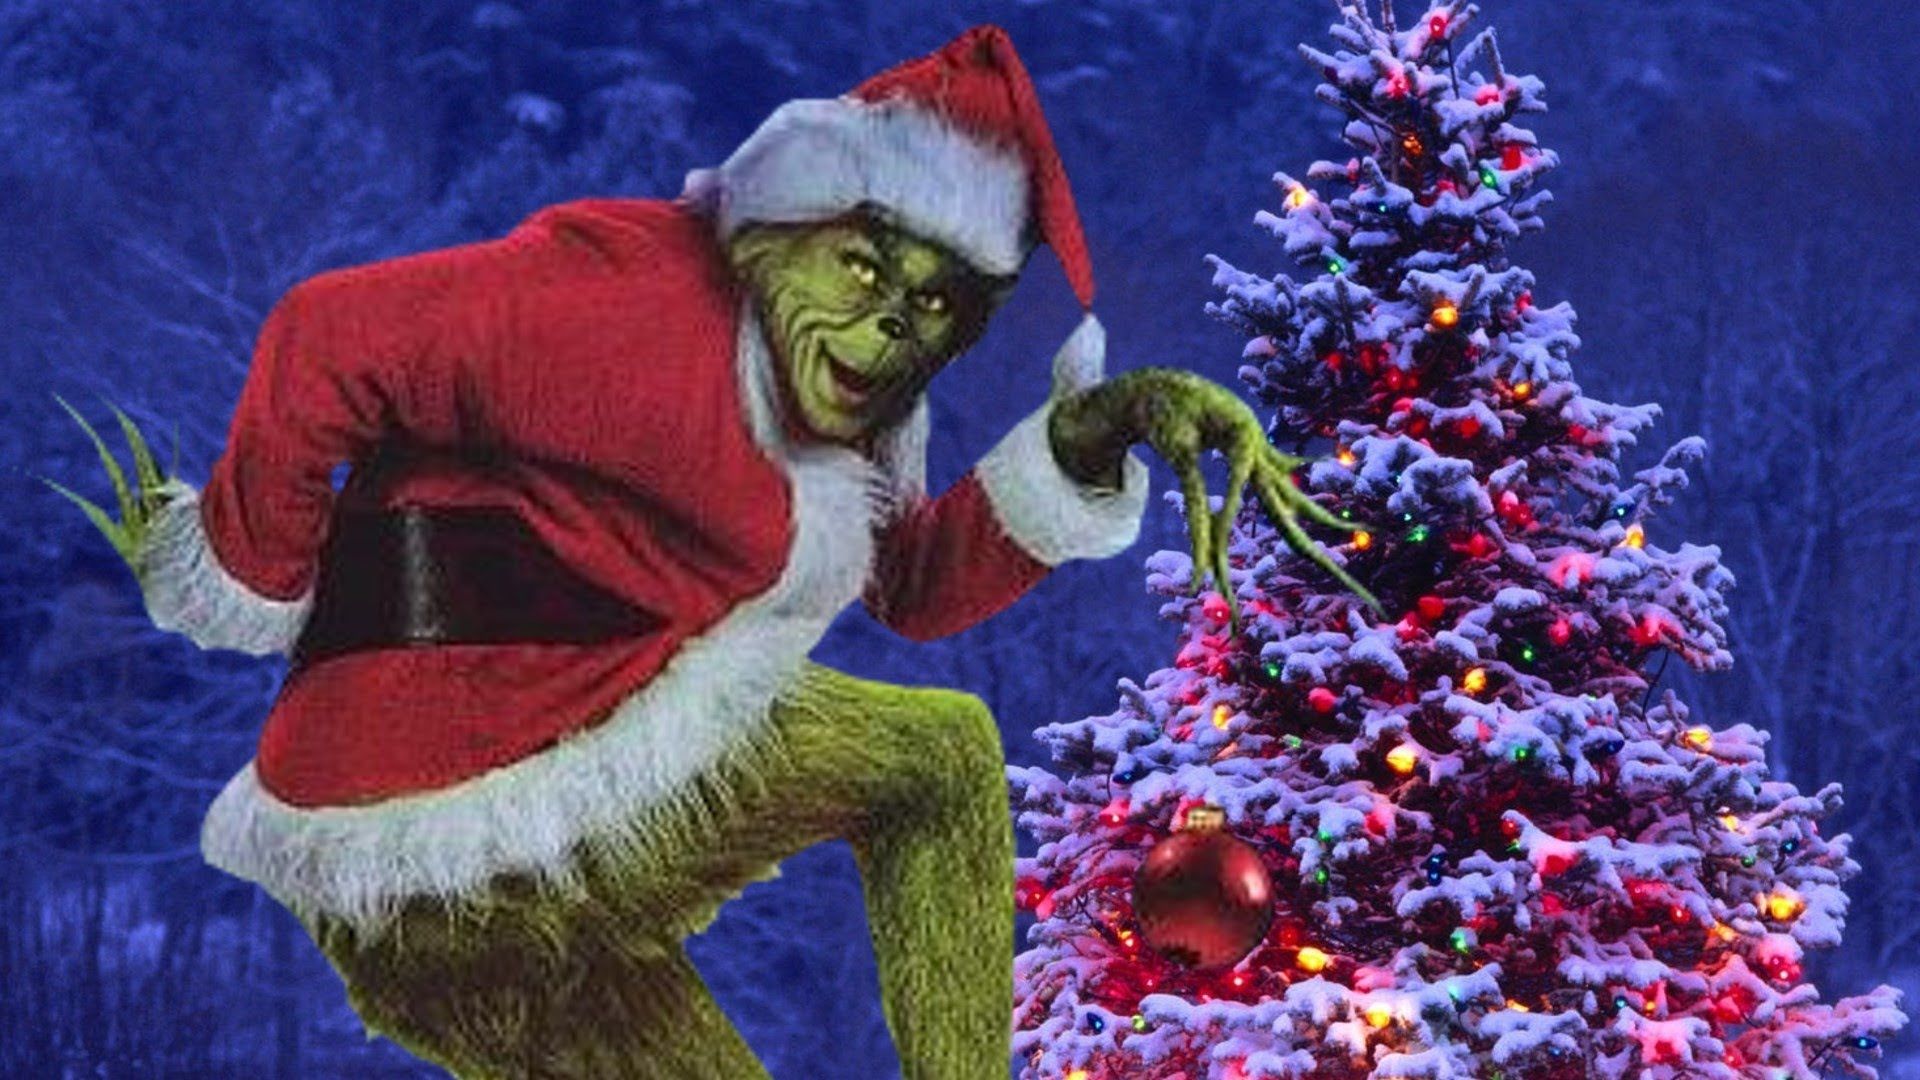 The Grinch Who Stole Christmas Wallpaper. Christmas Wallpaper, Beautiful Christmas Wallpaper and Awesome Christmas Wallpaper